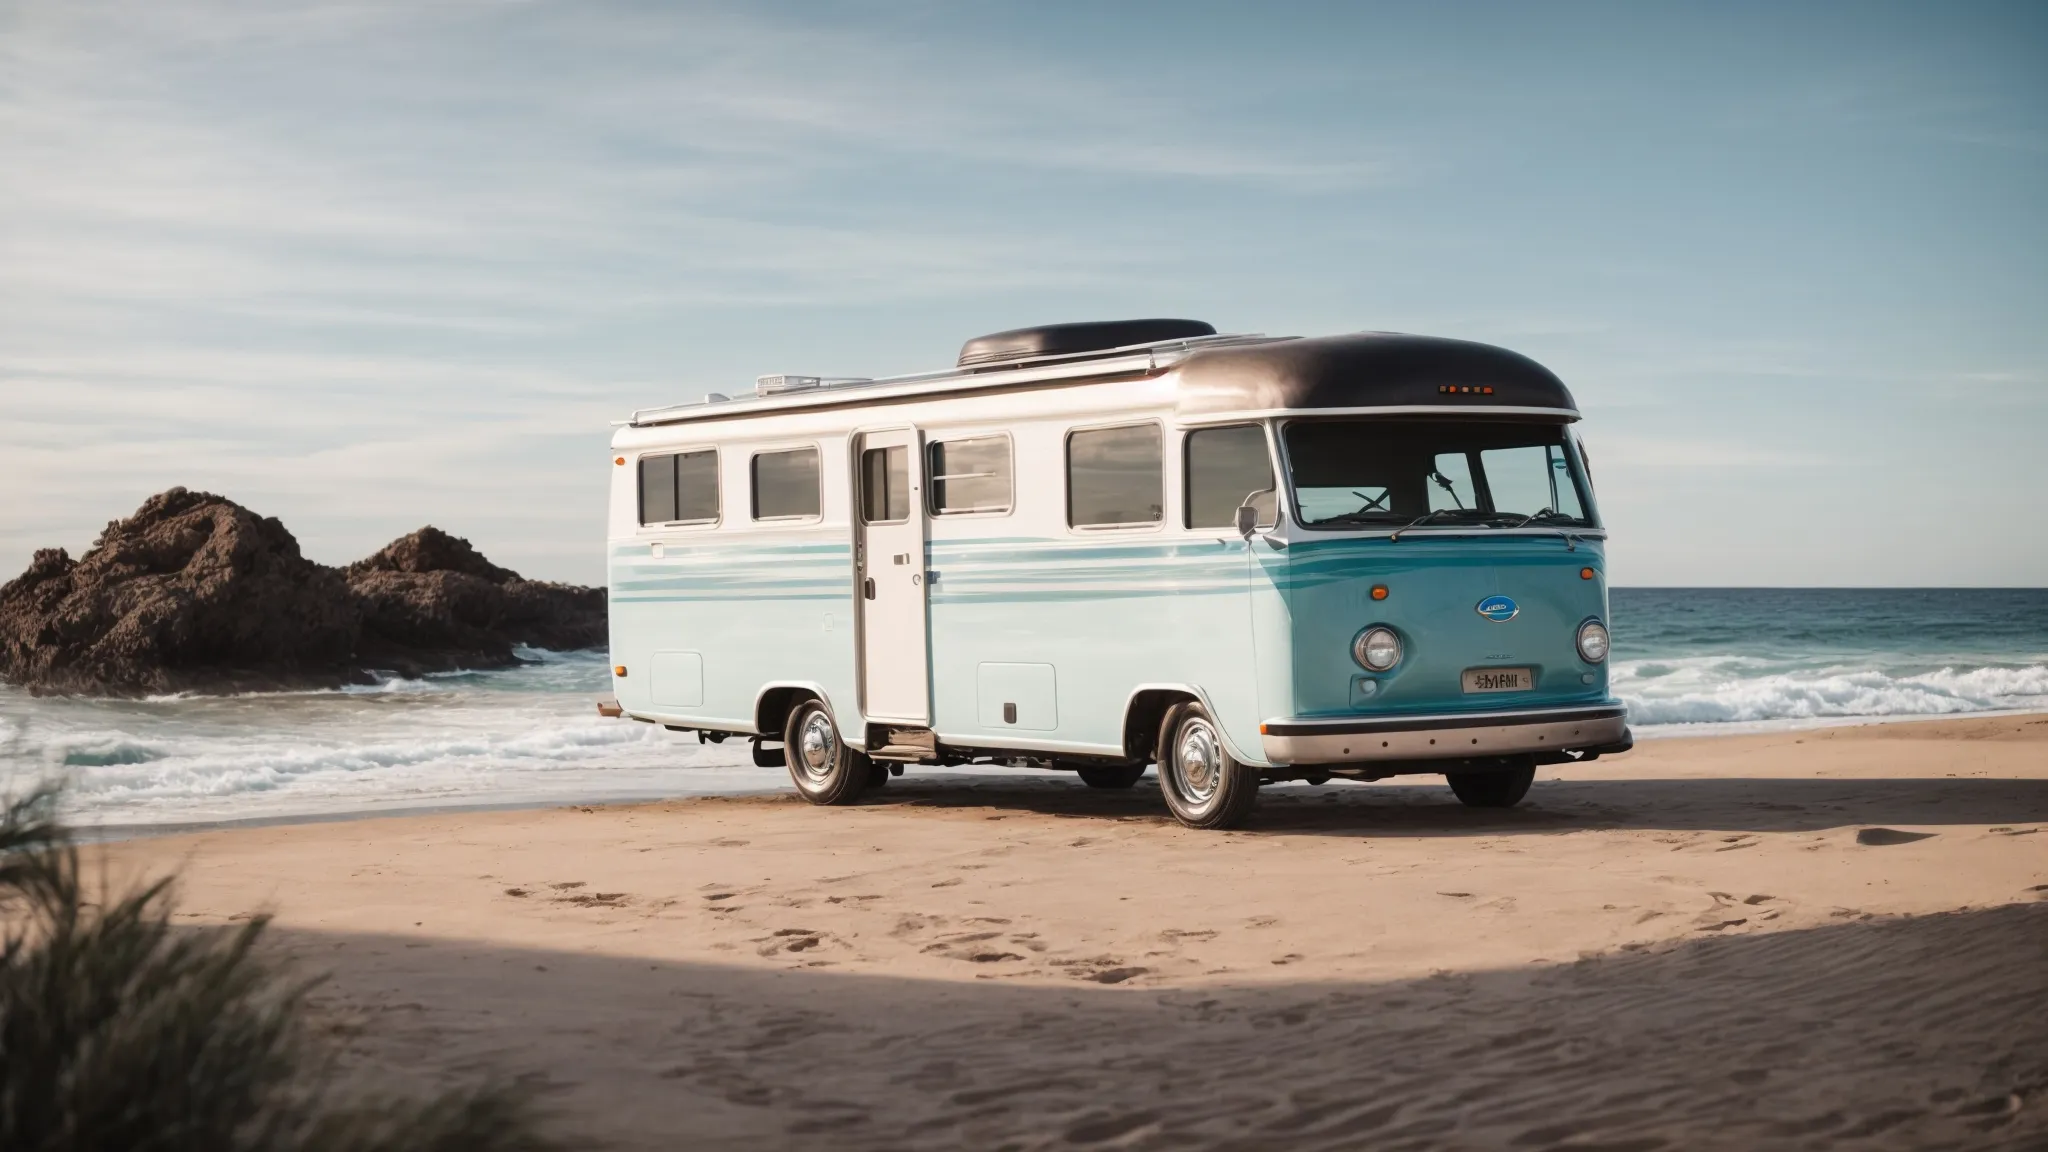 an rv nestled on the beachside under a clear sky with the ocean waves gently kissing the shore.